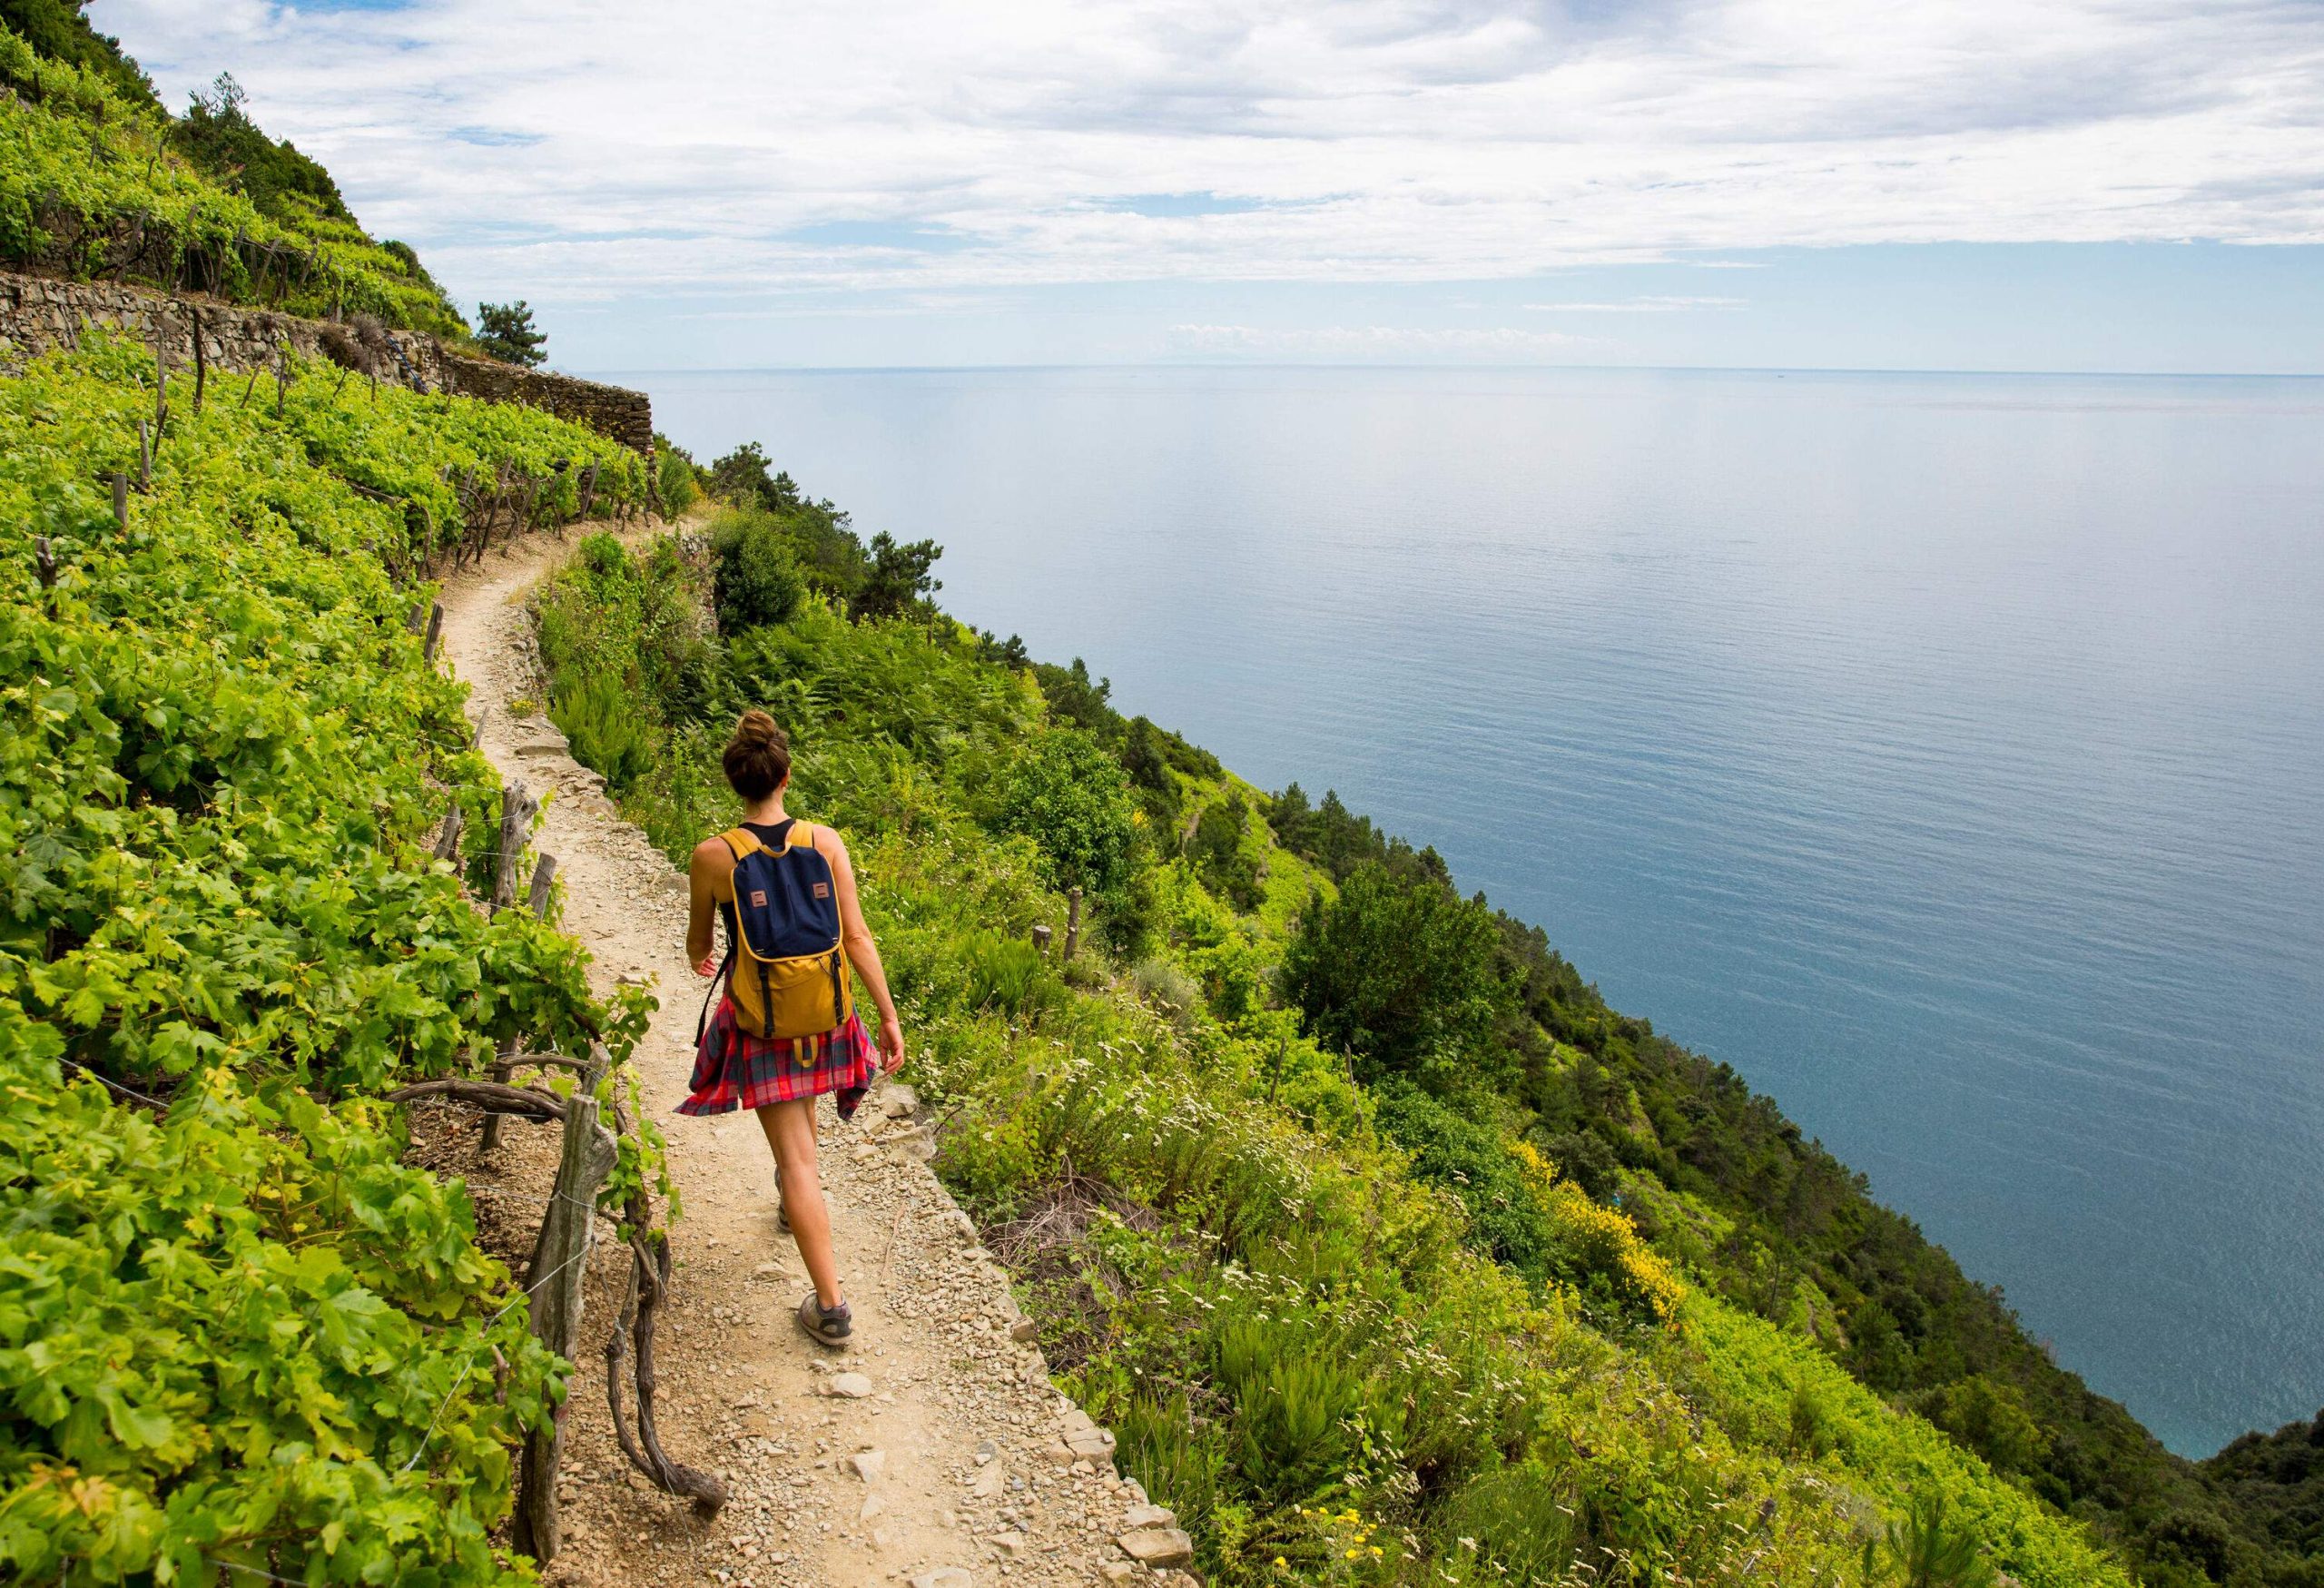 A person with a yellow backpack walking on a narrow sandy road of a mountain covered in lush greenery above the blue sea.